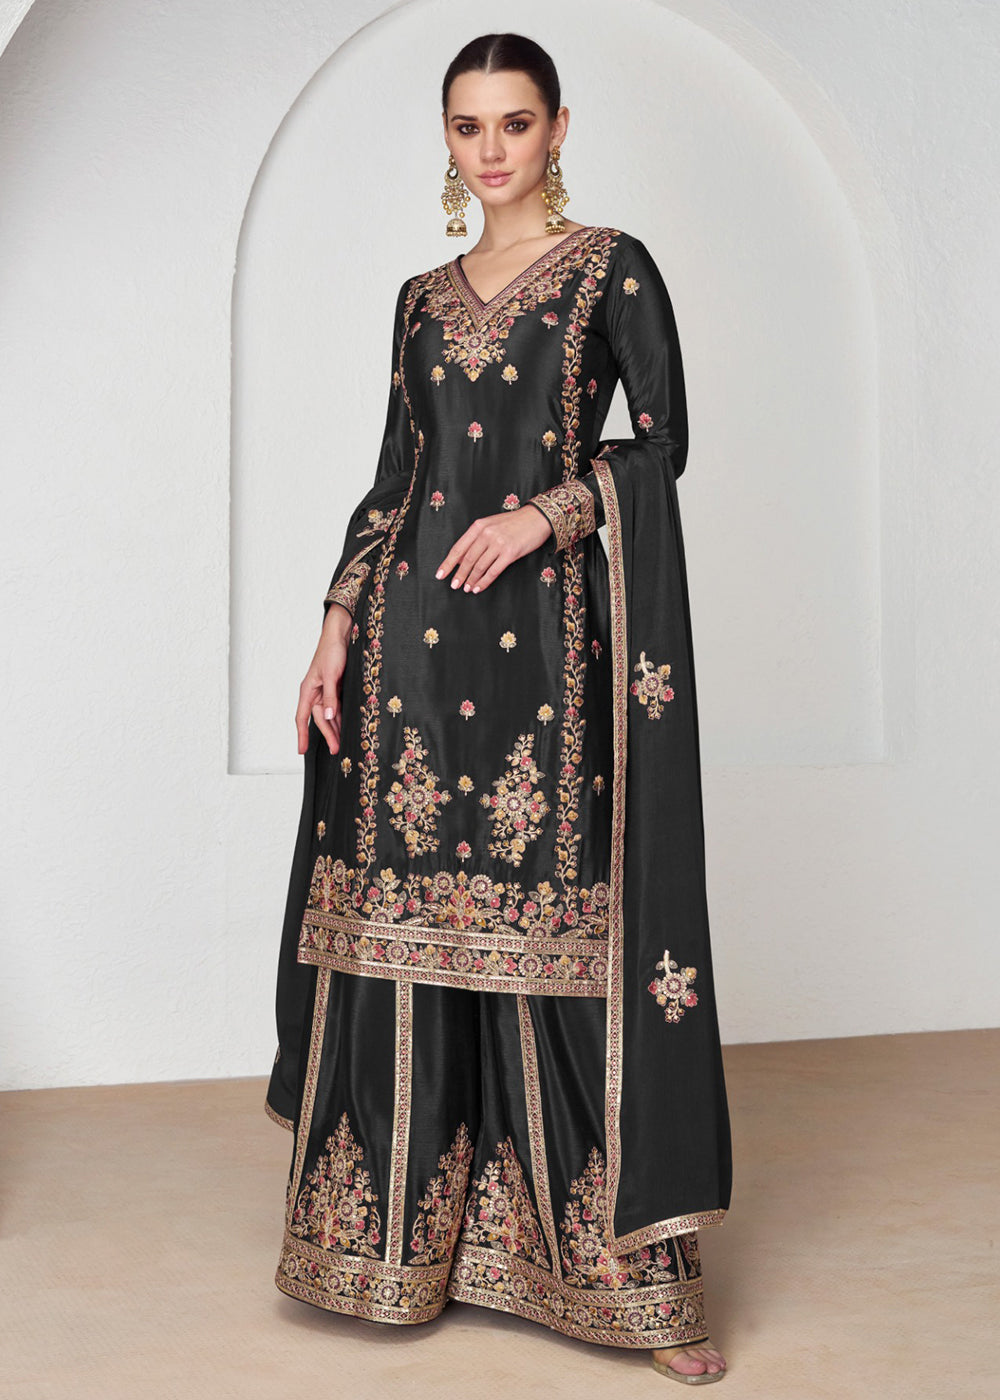 Buy Now Palazzo Style Premium Chinnon Silk Black Festive Suit Online in USA, UK, Canada, Germany, Australia & Worldwide at Empress Clothing. 